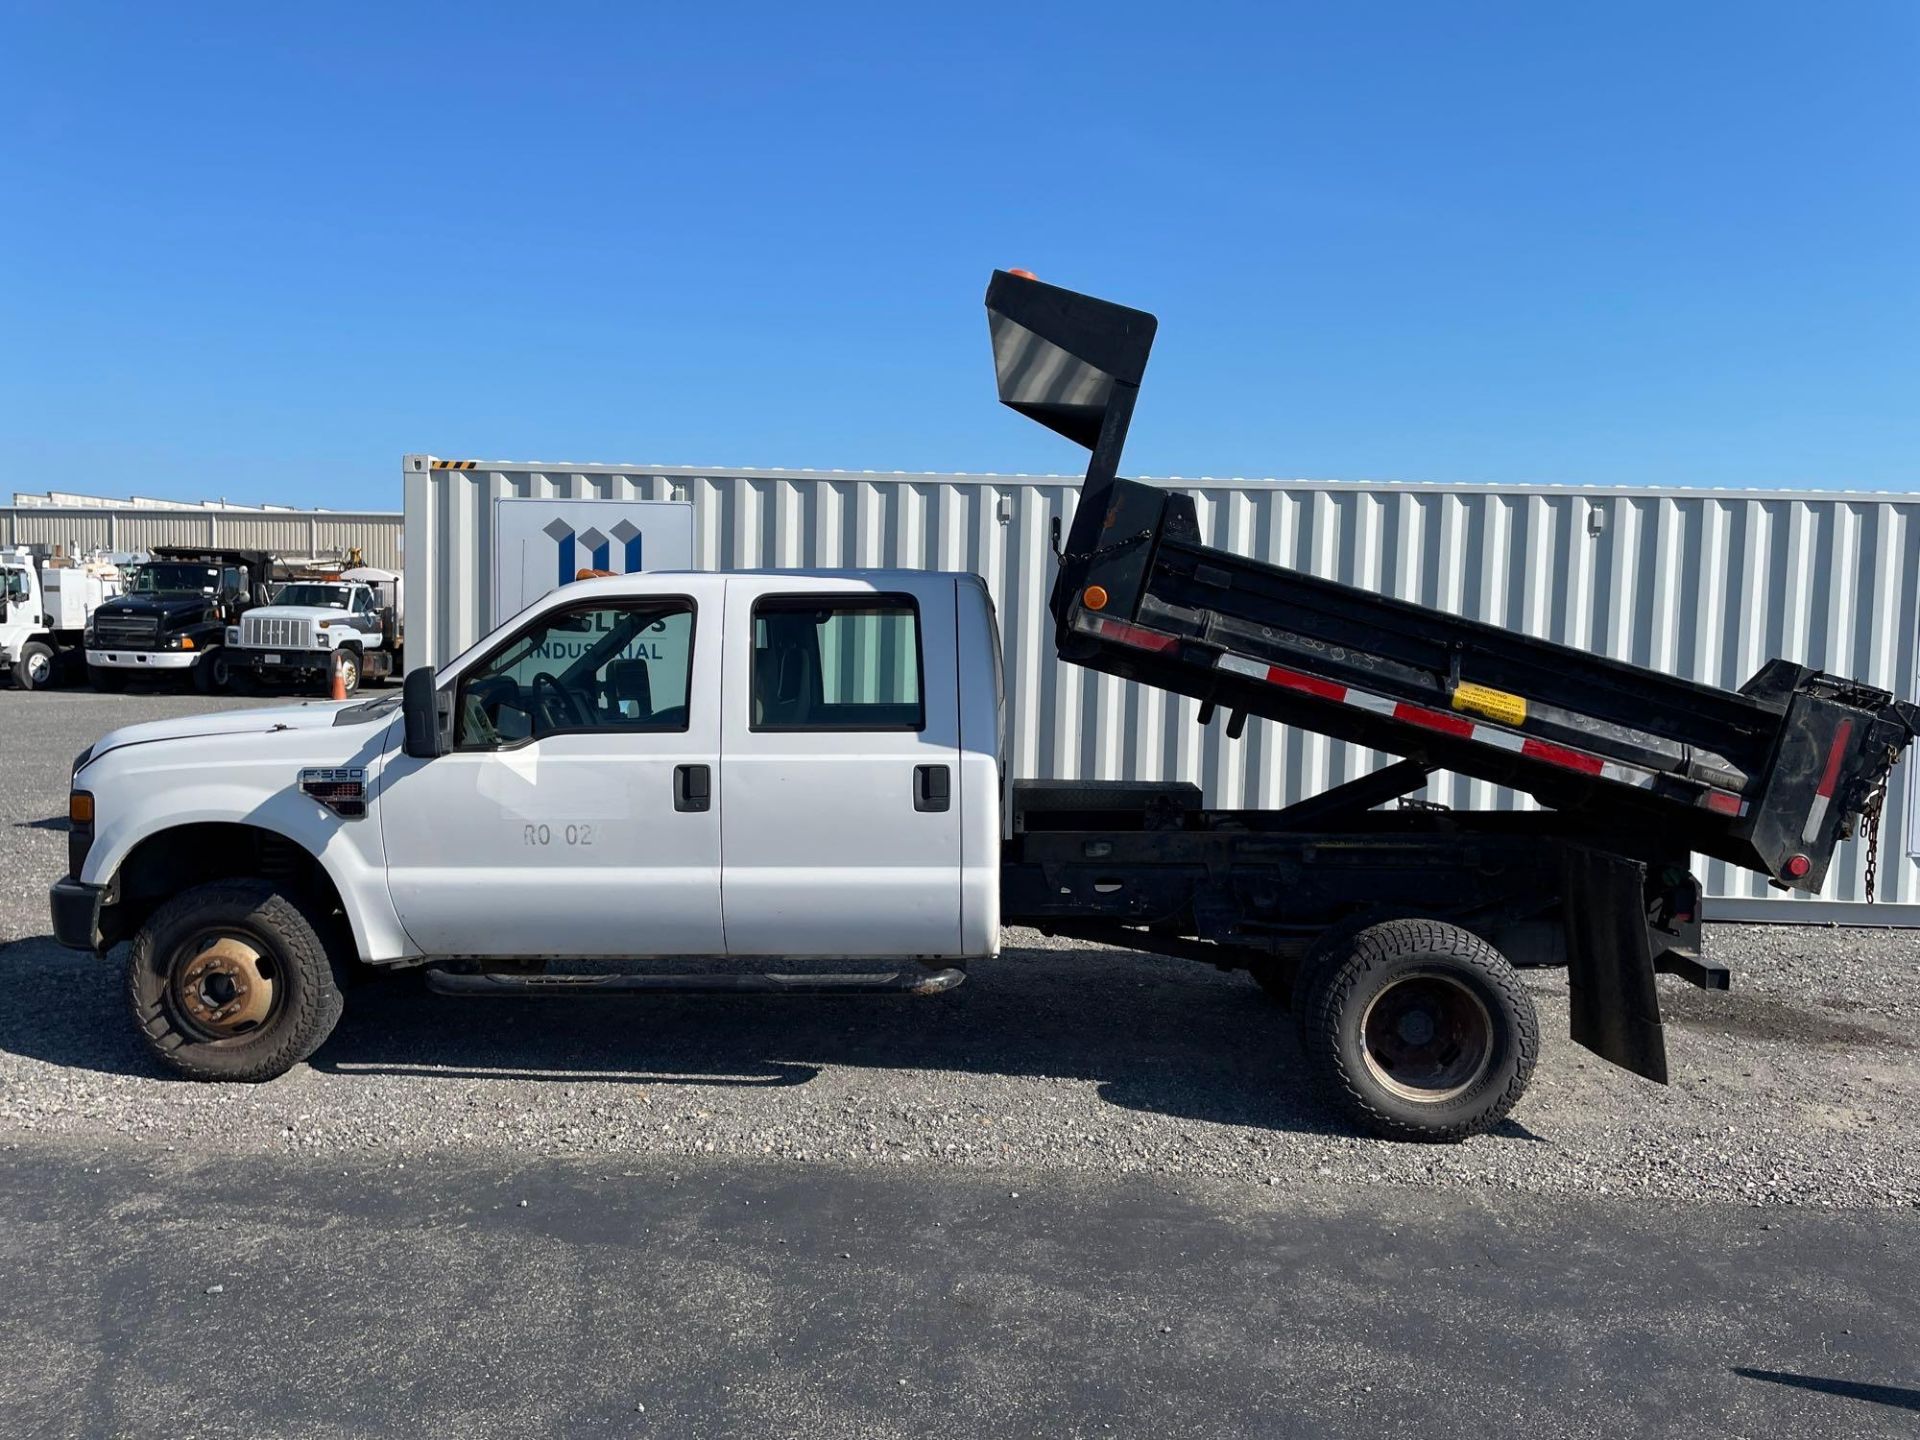 2008 Ford F-350 Crew Cab Dump Truck - Image 18 of 23